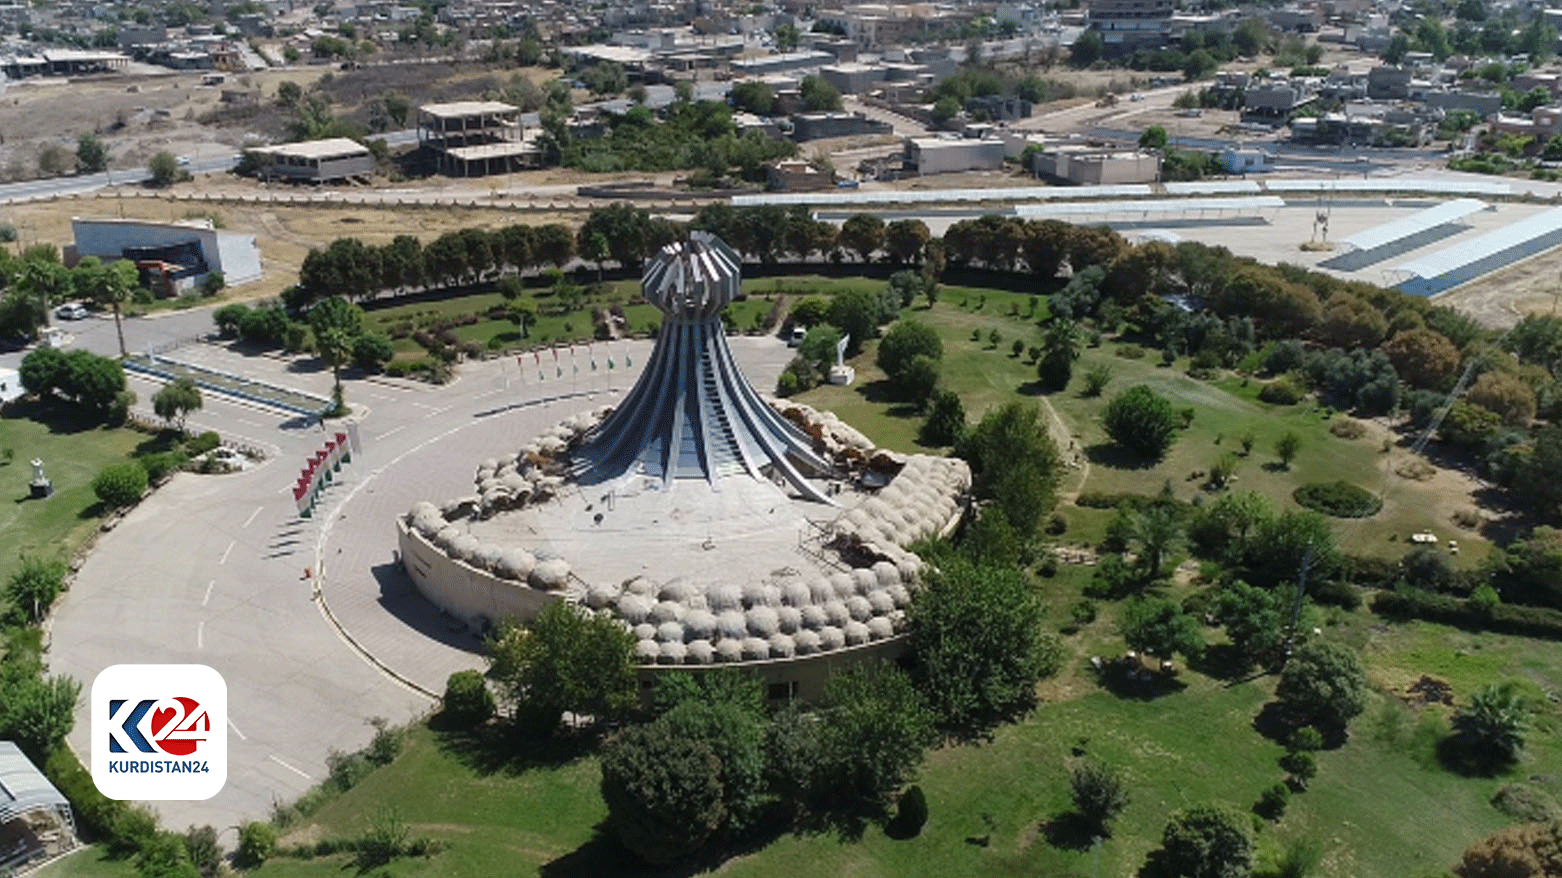 Trial of companies complicit in Baathist regime crimes in final stages says Halabja org